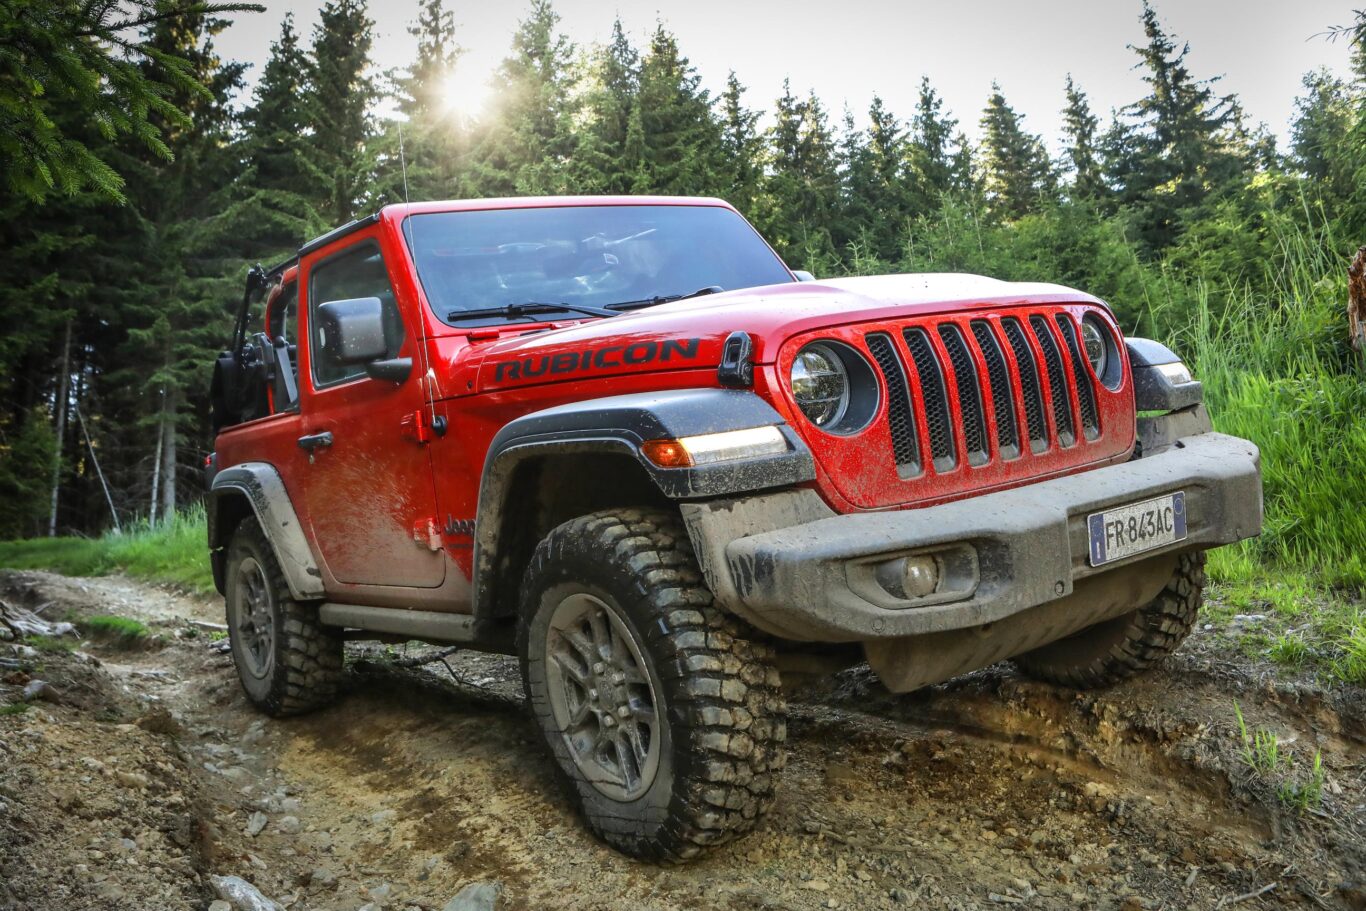 The Wrangler is hugely entertaining off-road